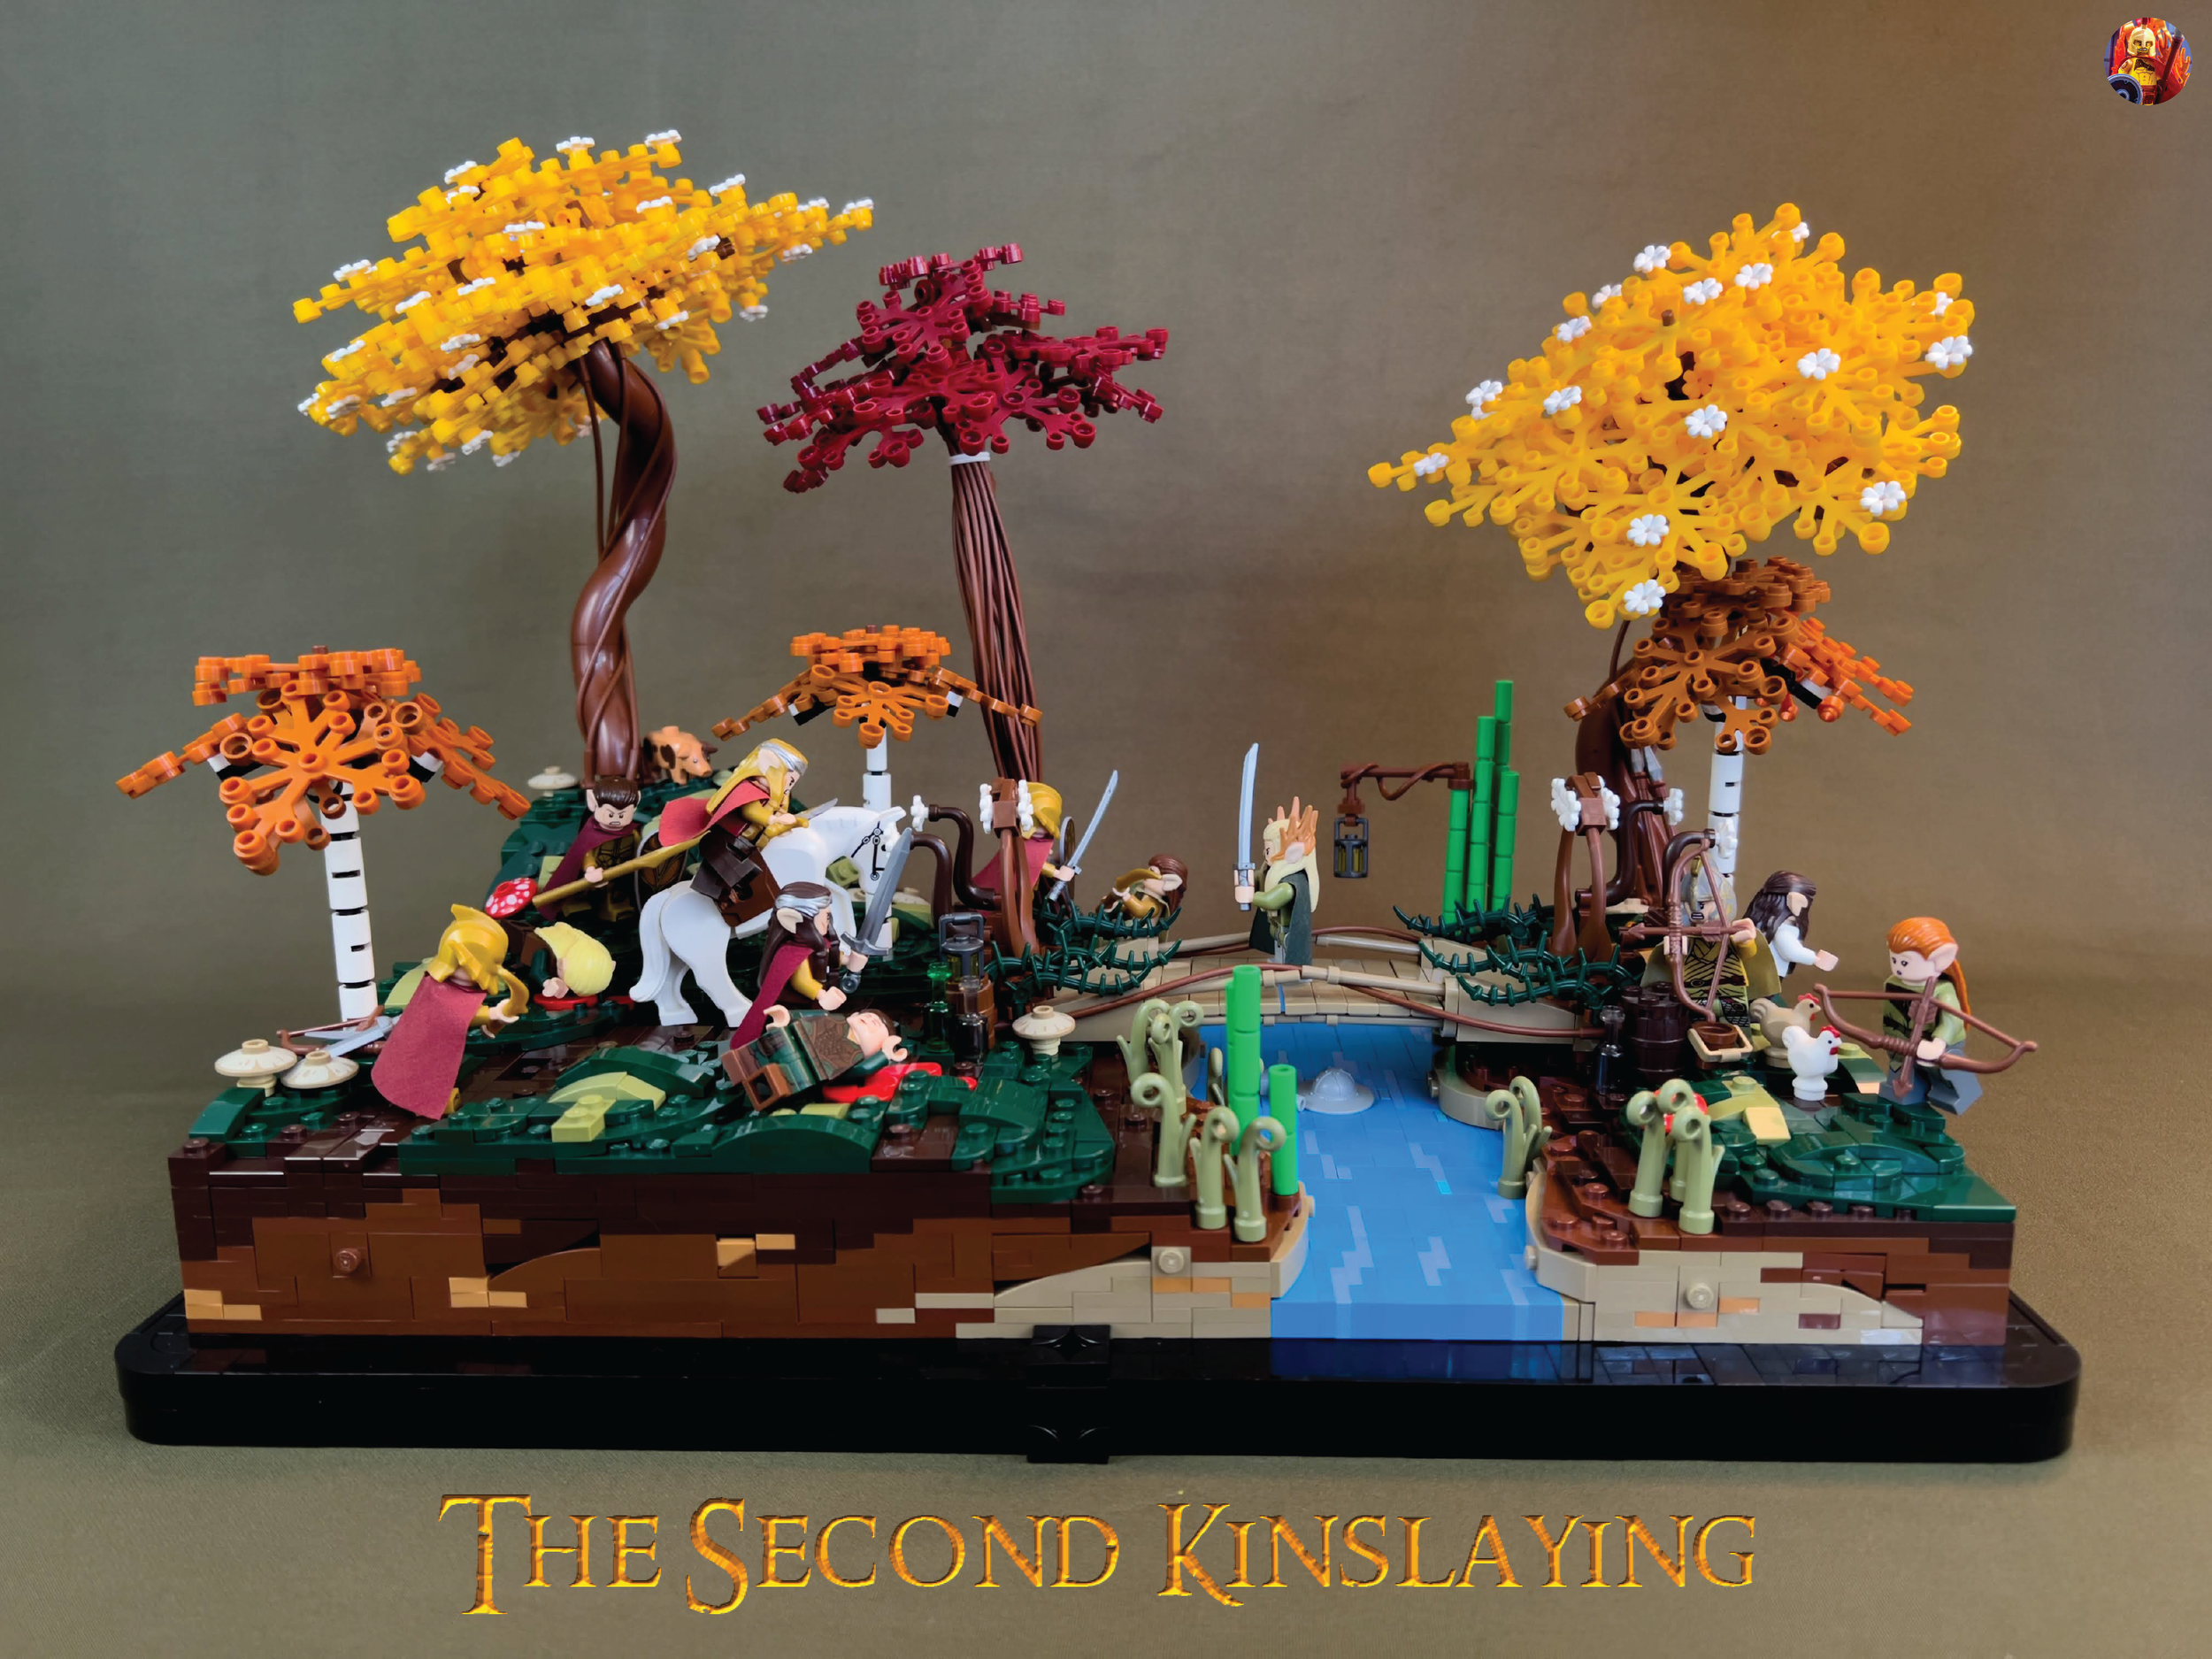  The Second Kinslaying, by  Spartan Bricks  